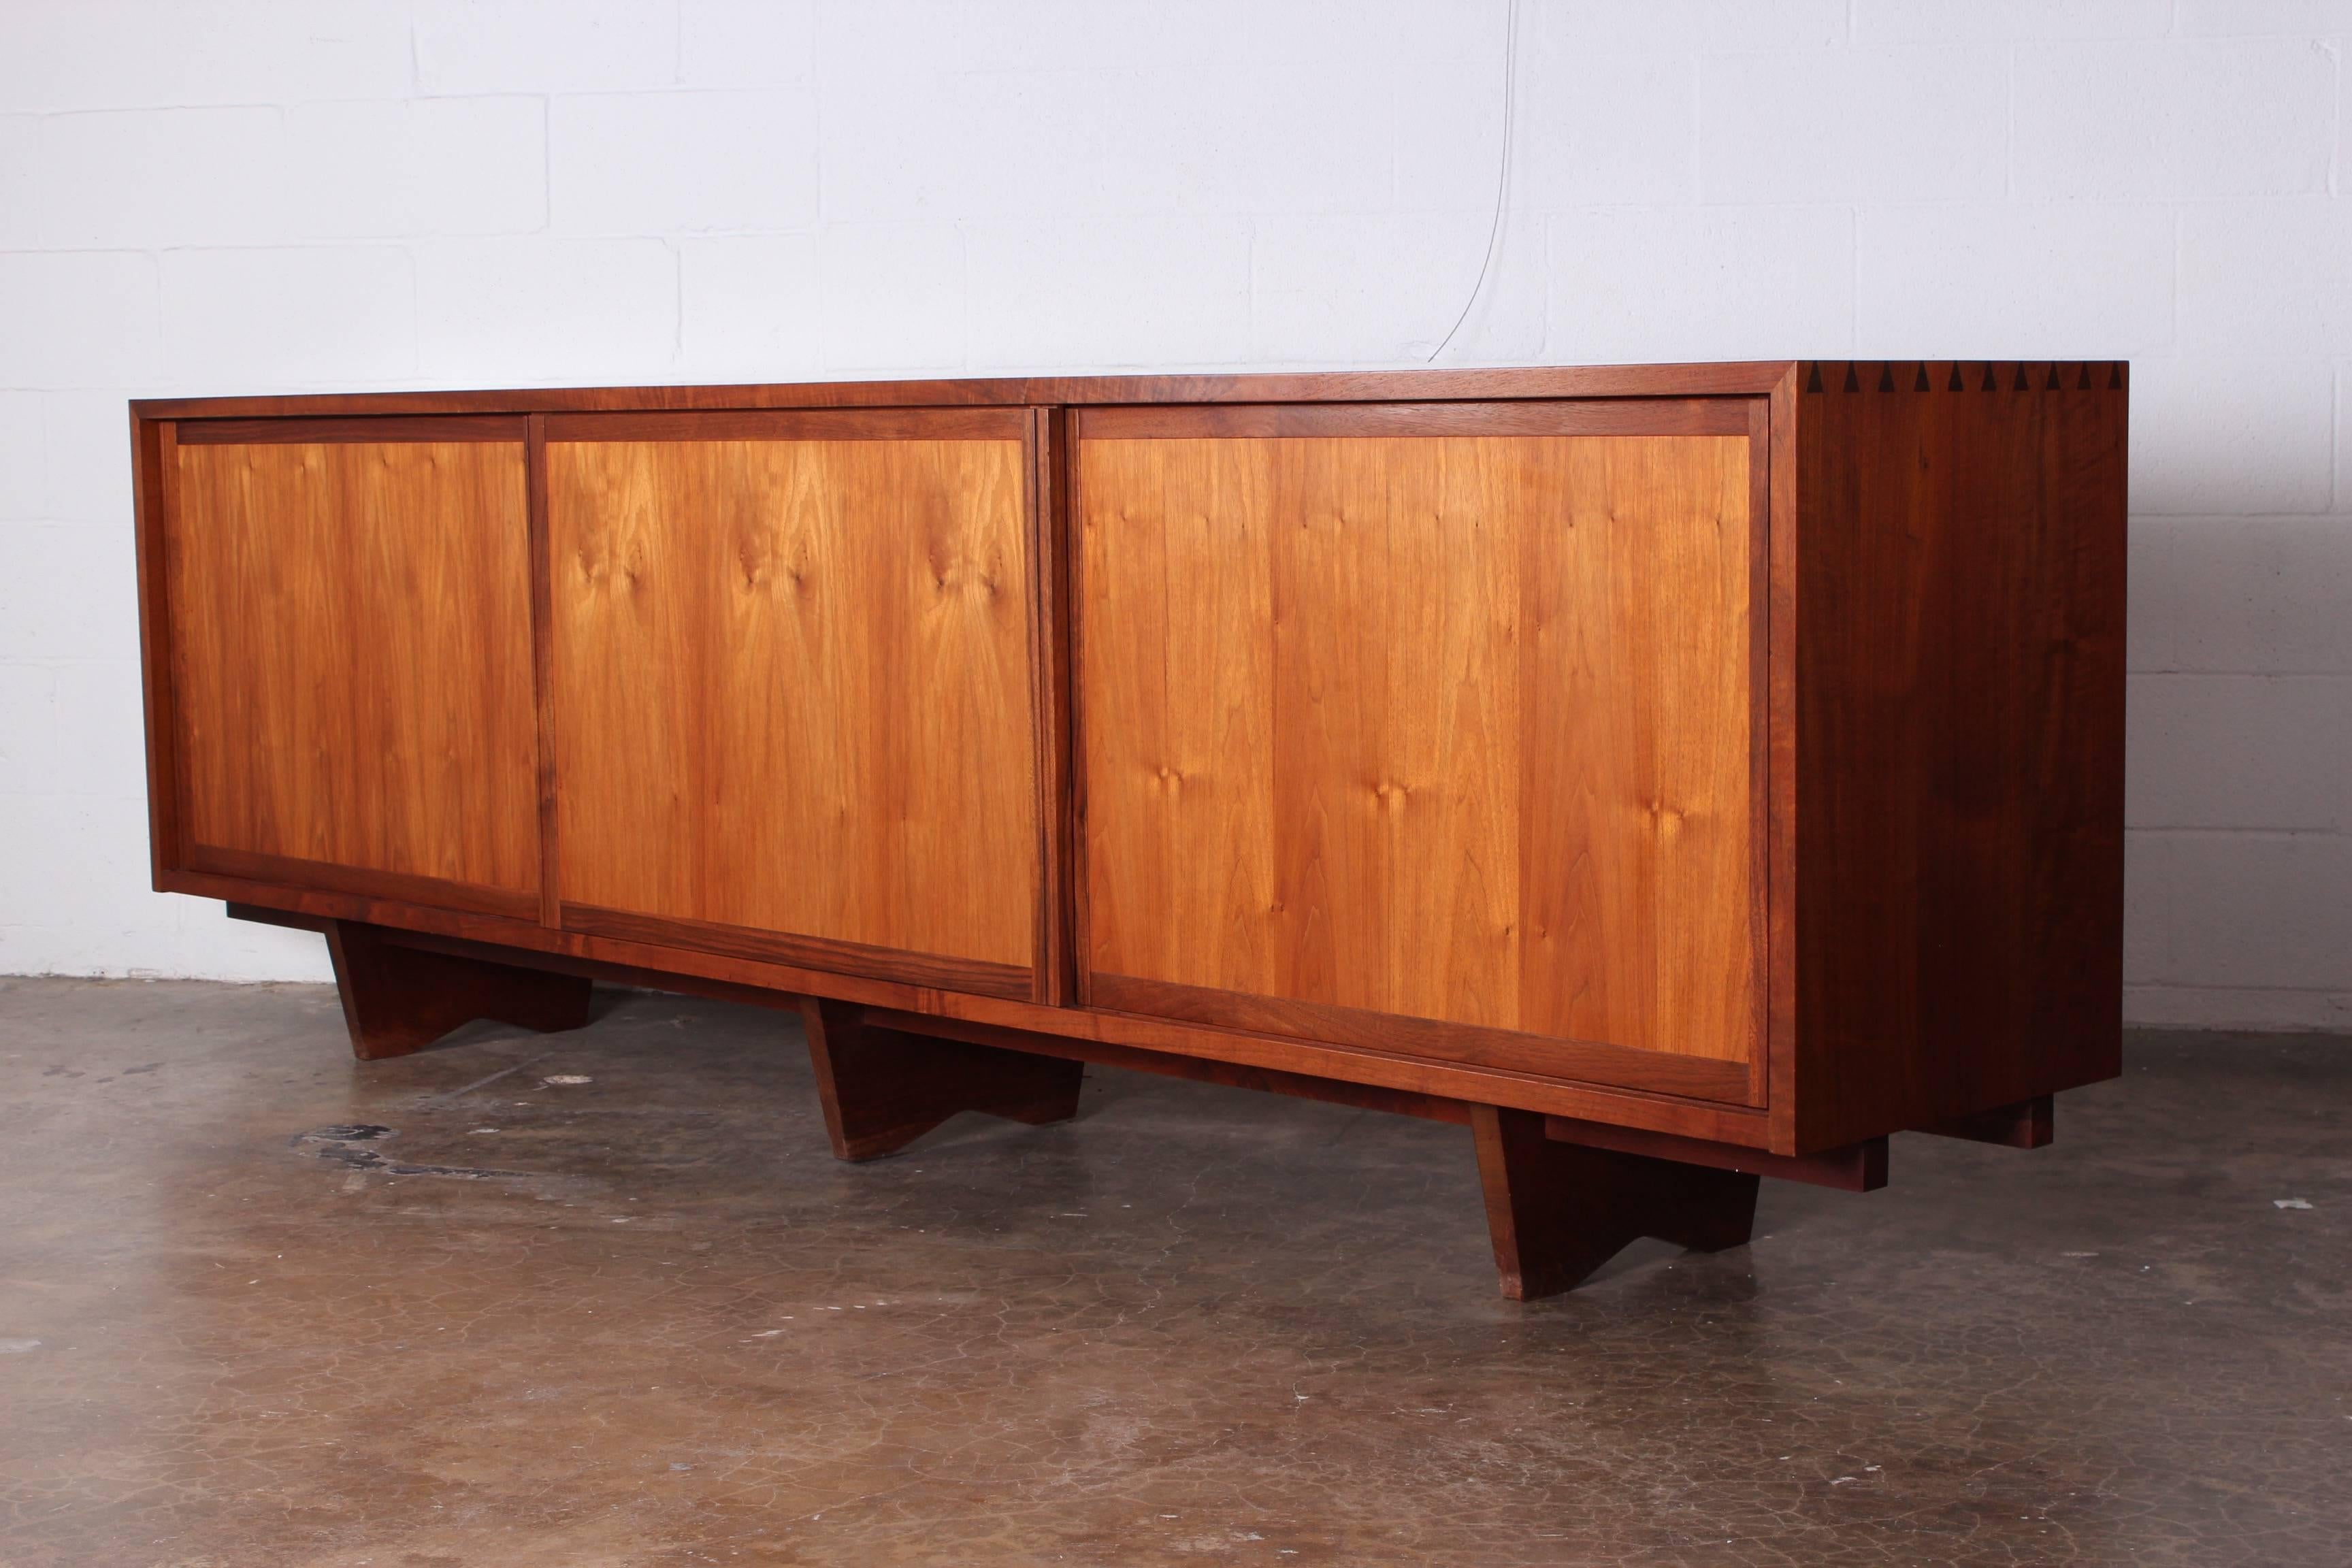 A large sliding three door walnut credenza by George Nakashima. Signed and dated 1978.